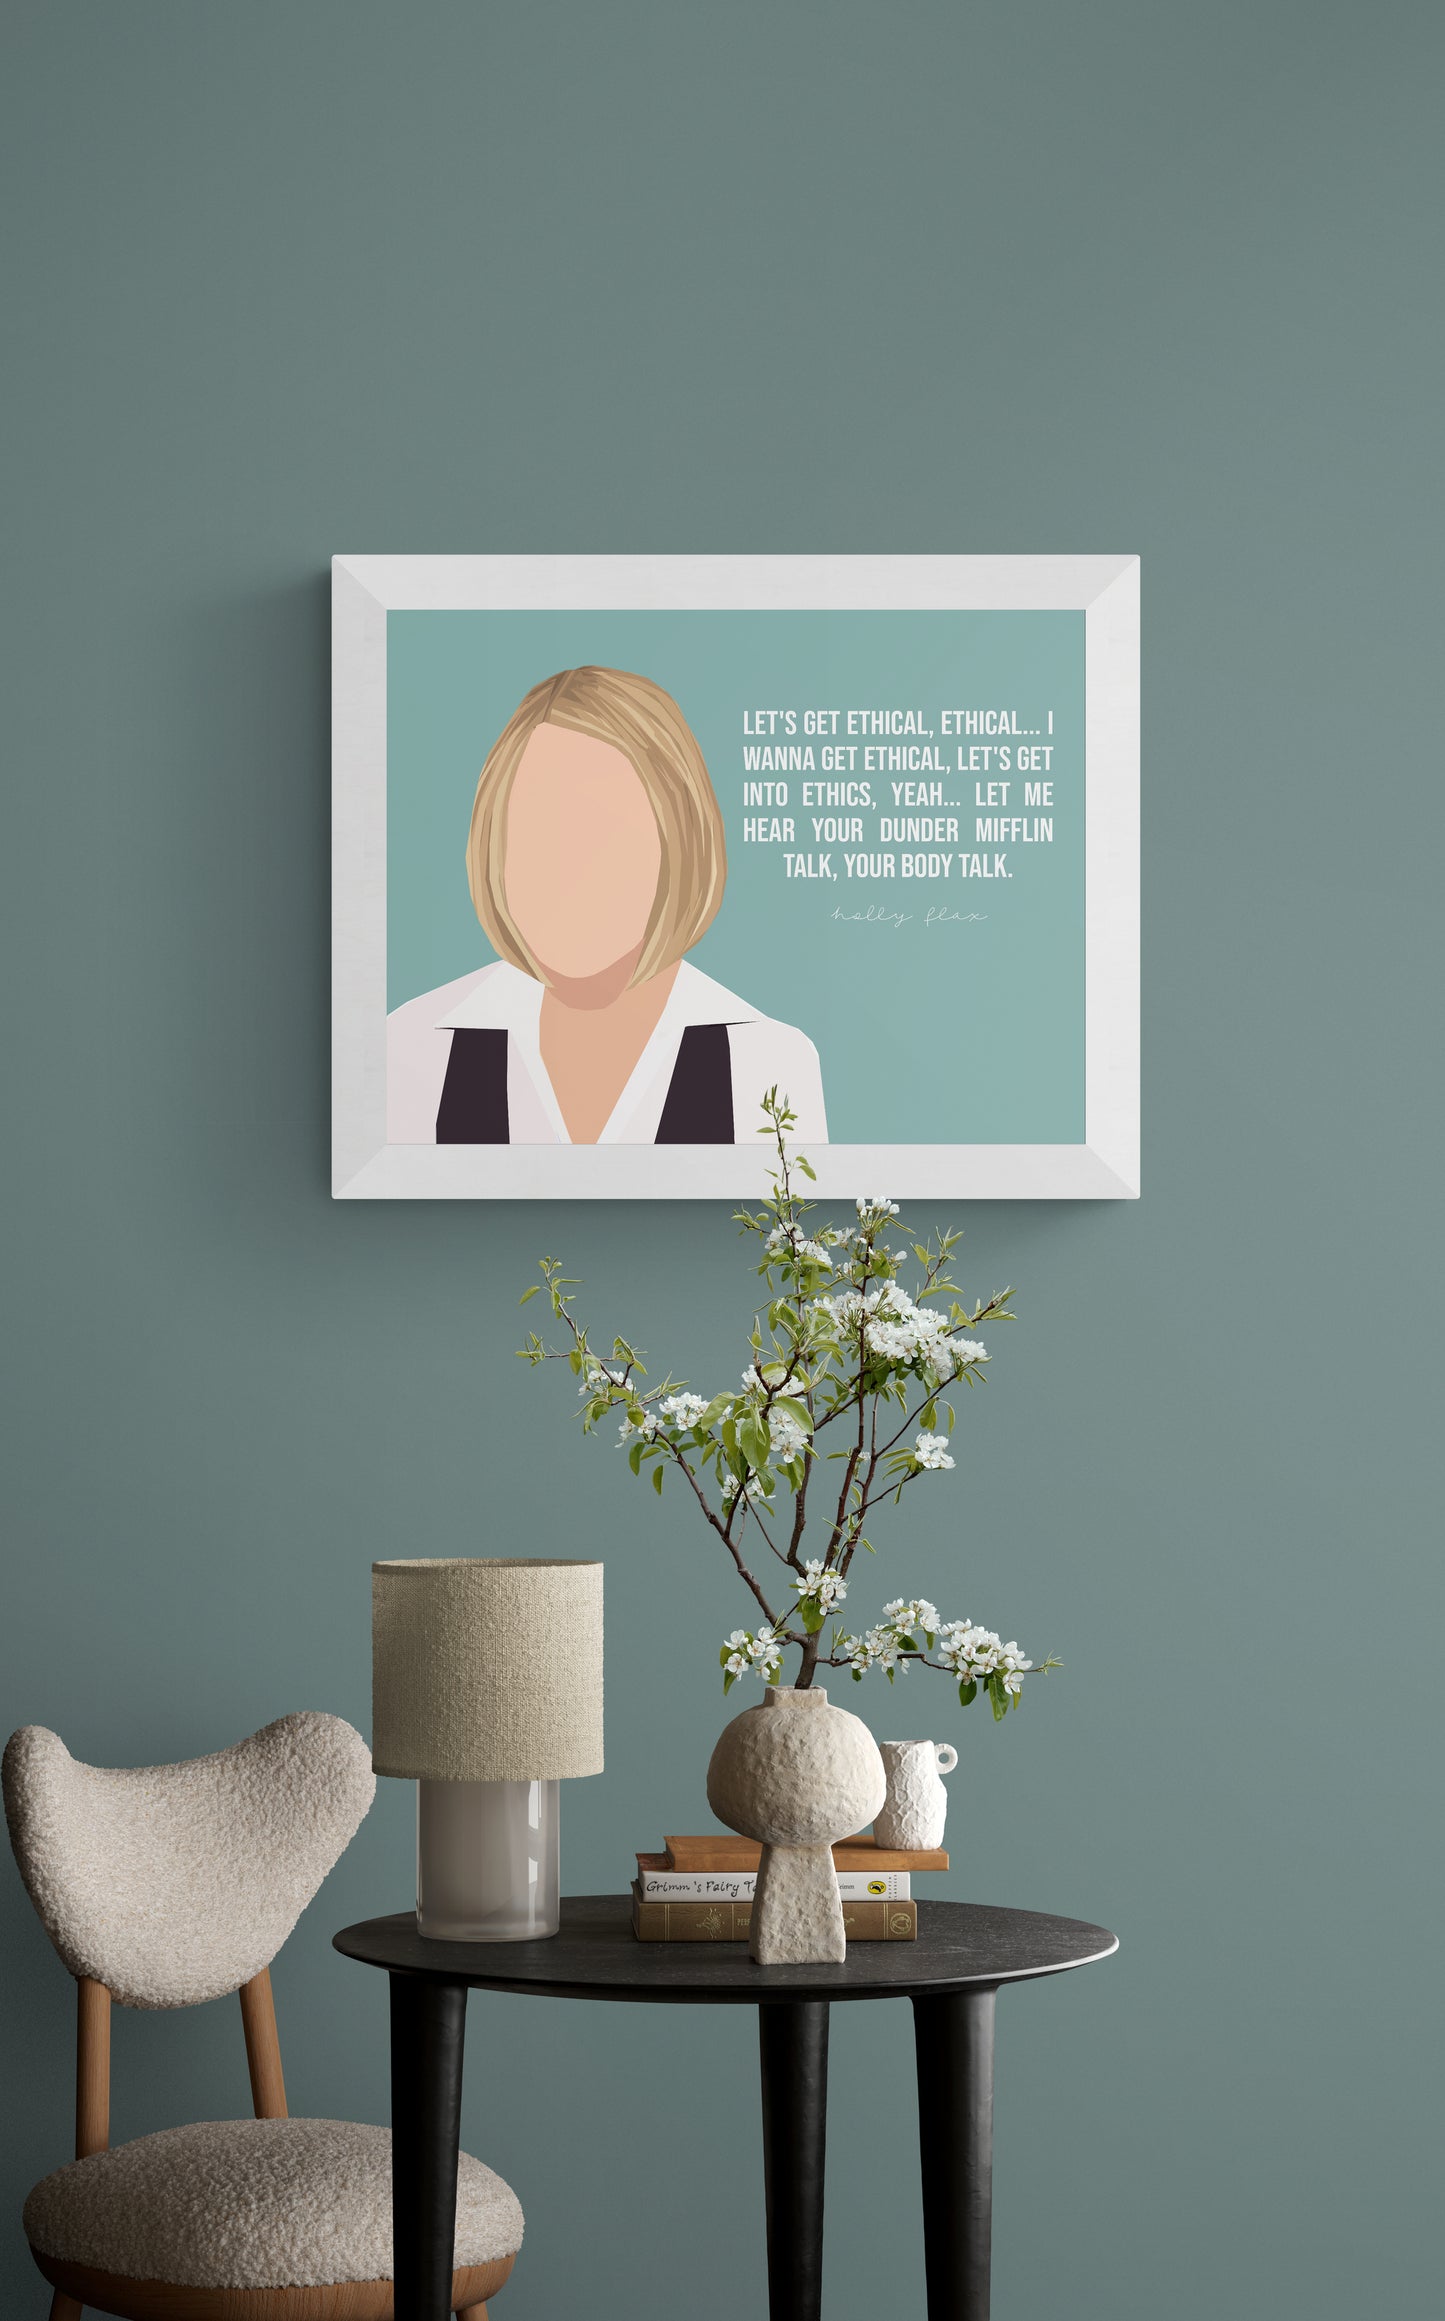 Holly and Michael Scott from The Office tv show art print